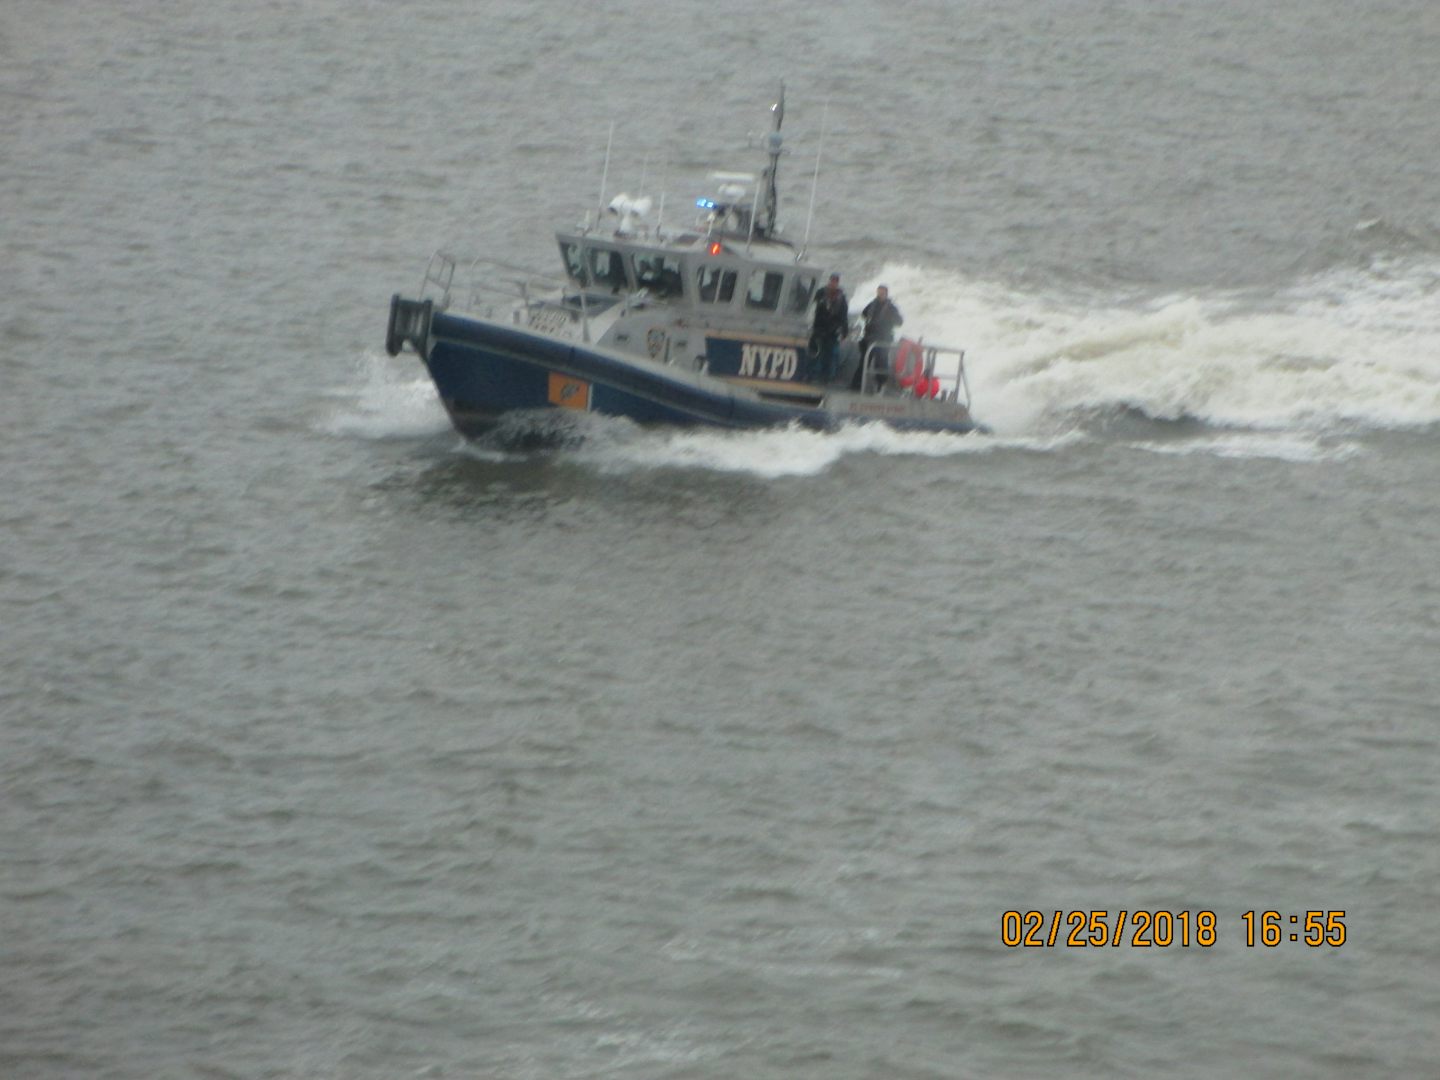 The NYPD boat leaving the Breakaway.